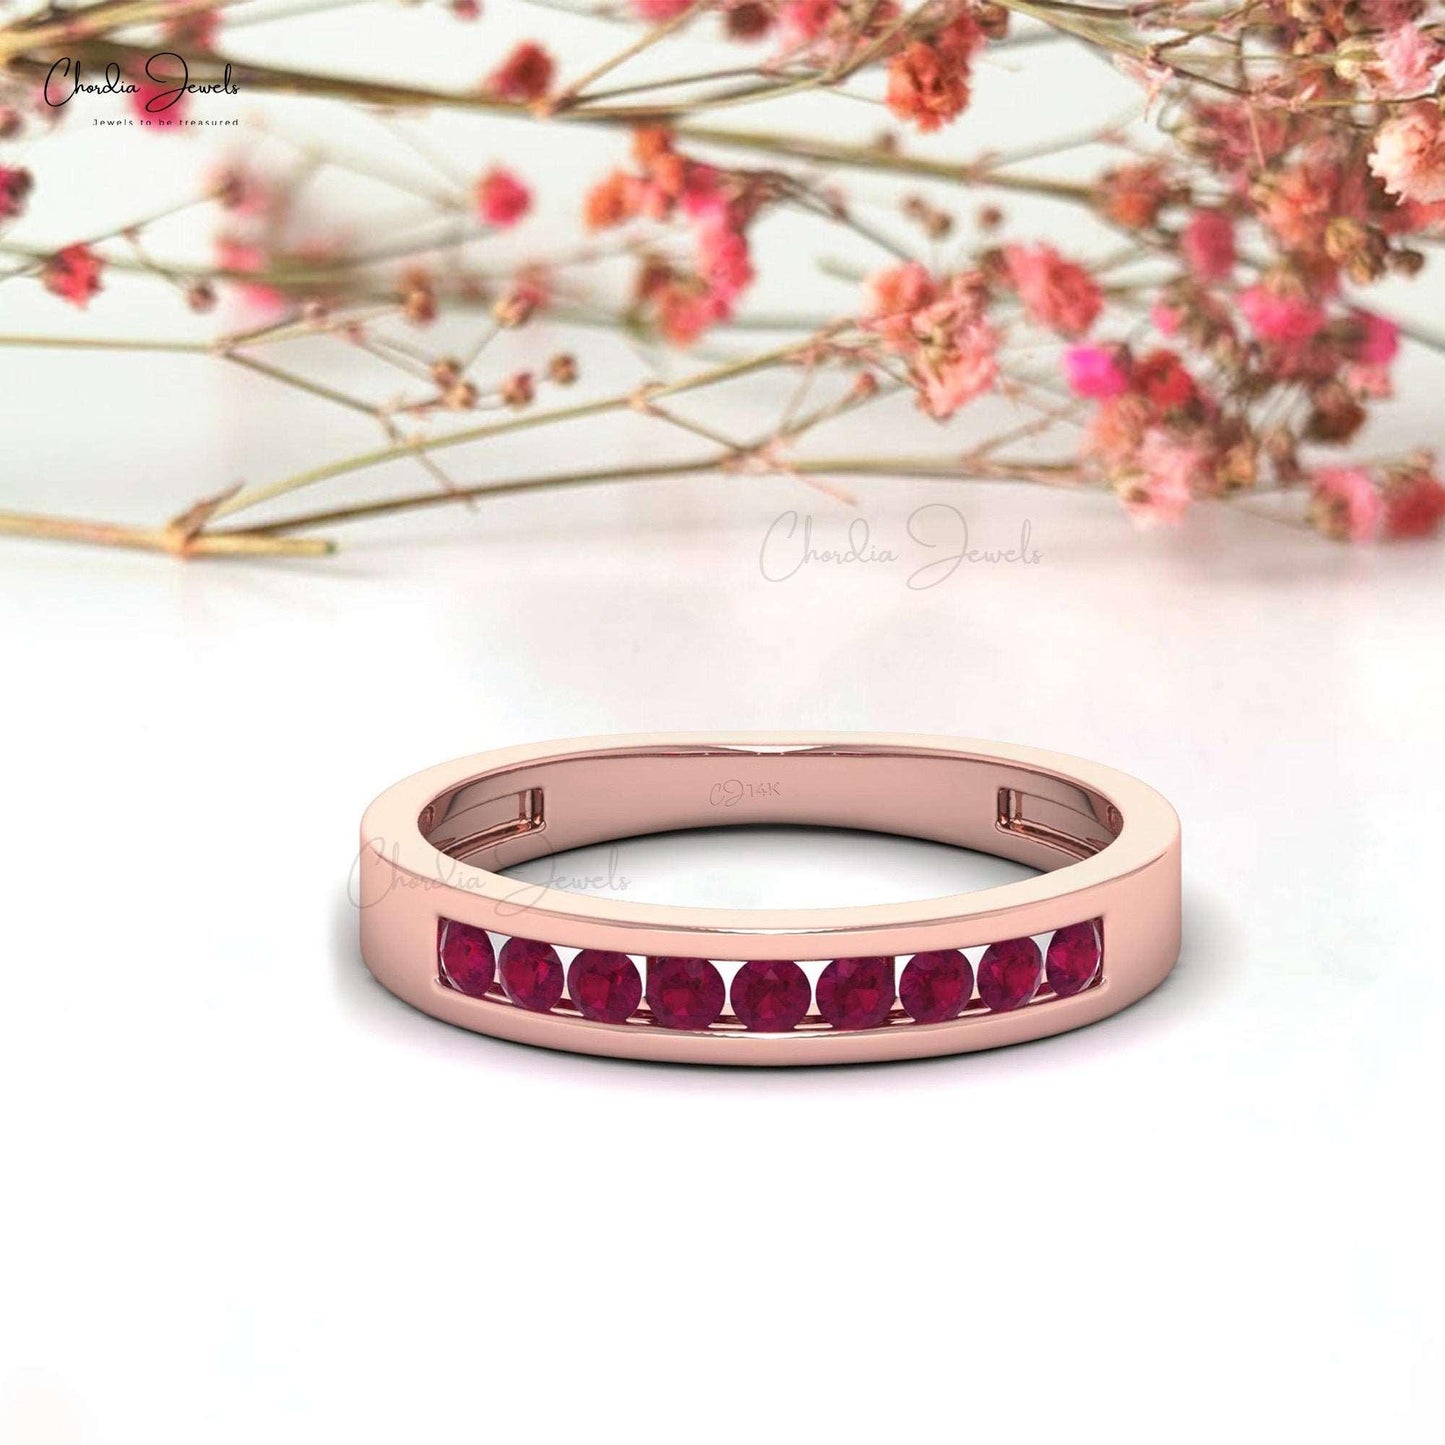 0.27 Carats Natural Red Ruby Half Eternity Band in 14k Solid Gold - Chordia Jewels